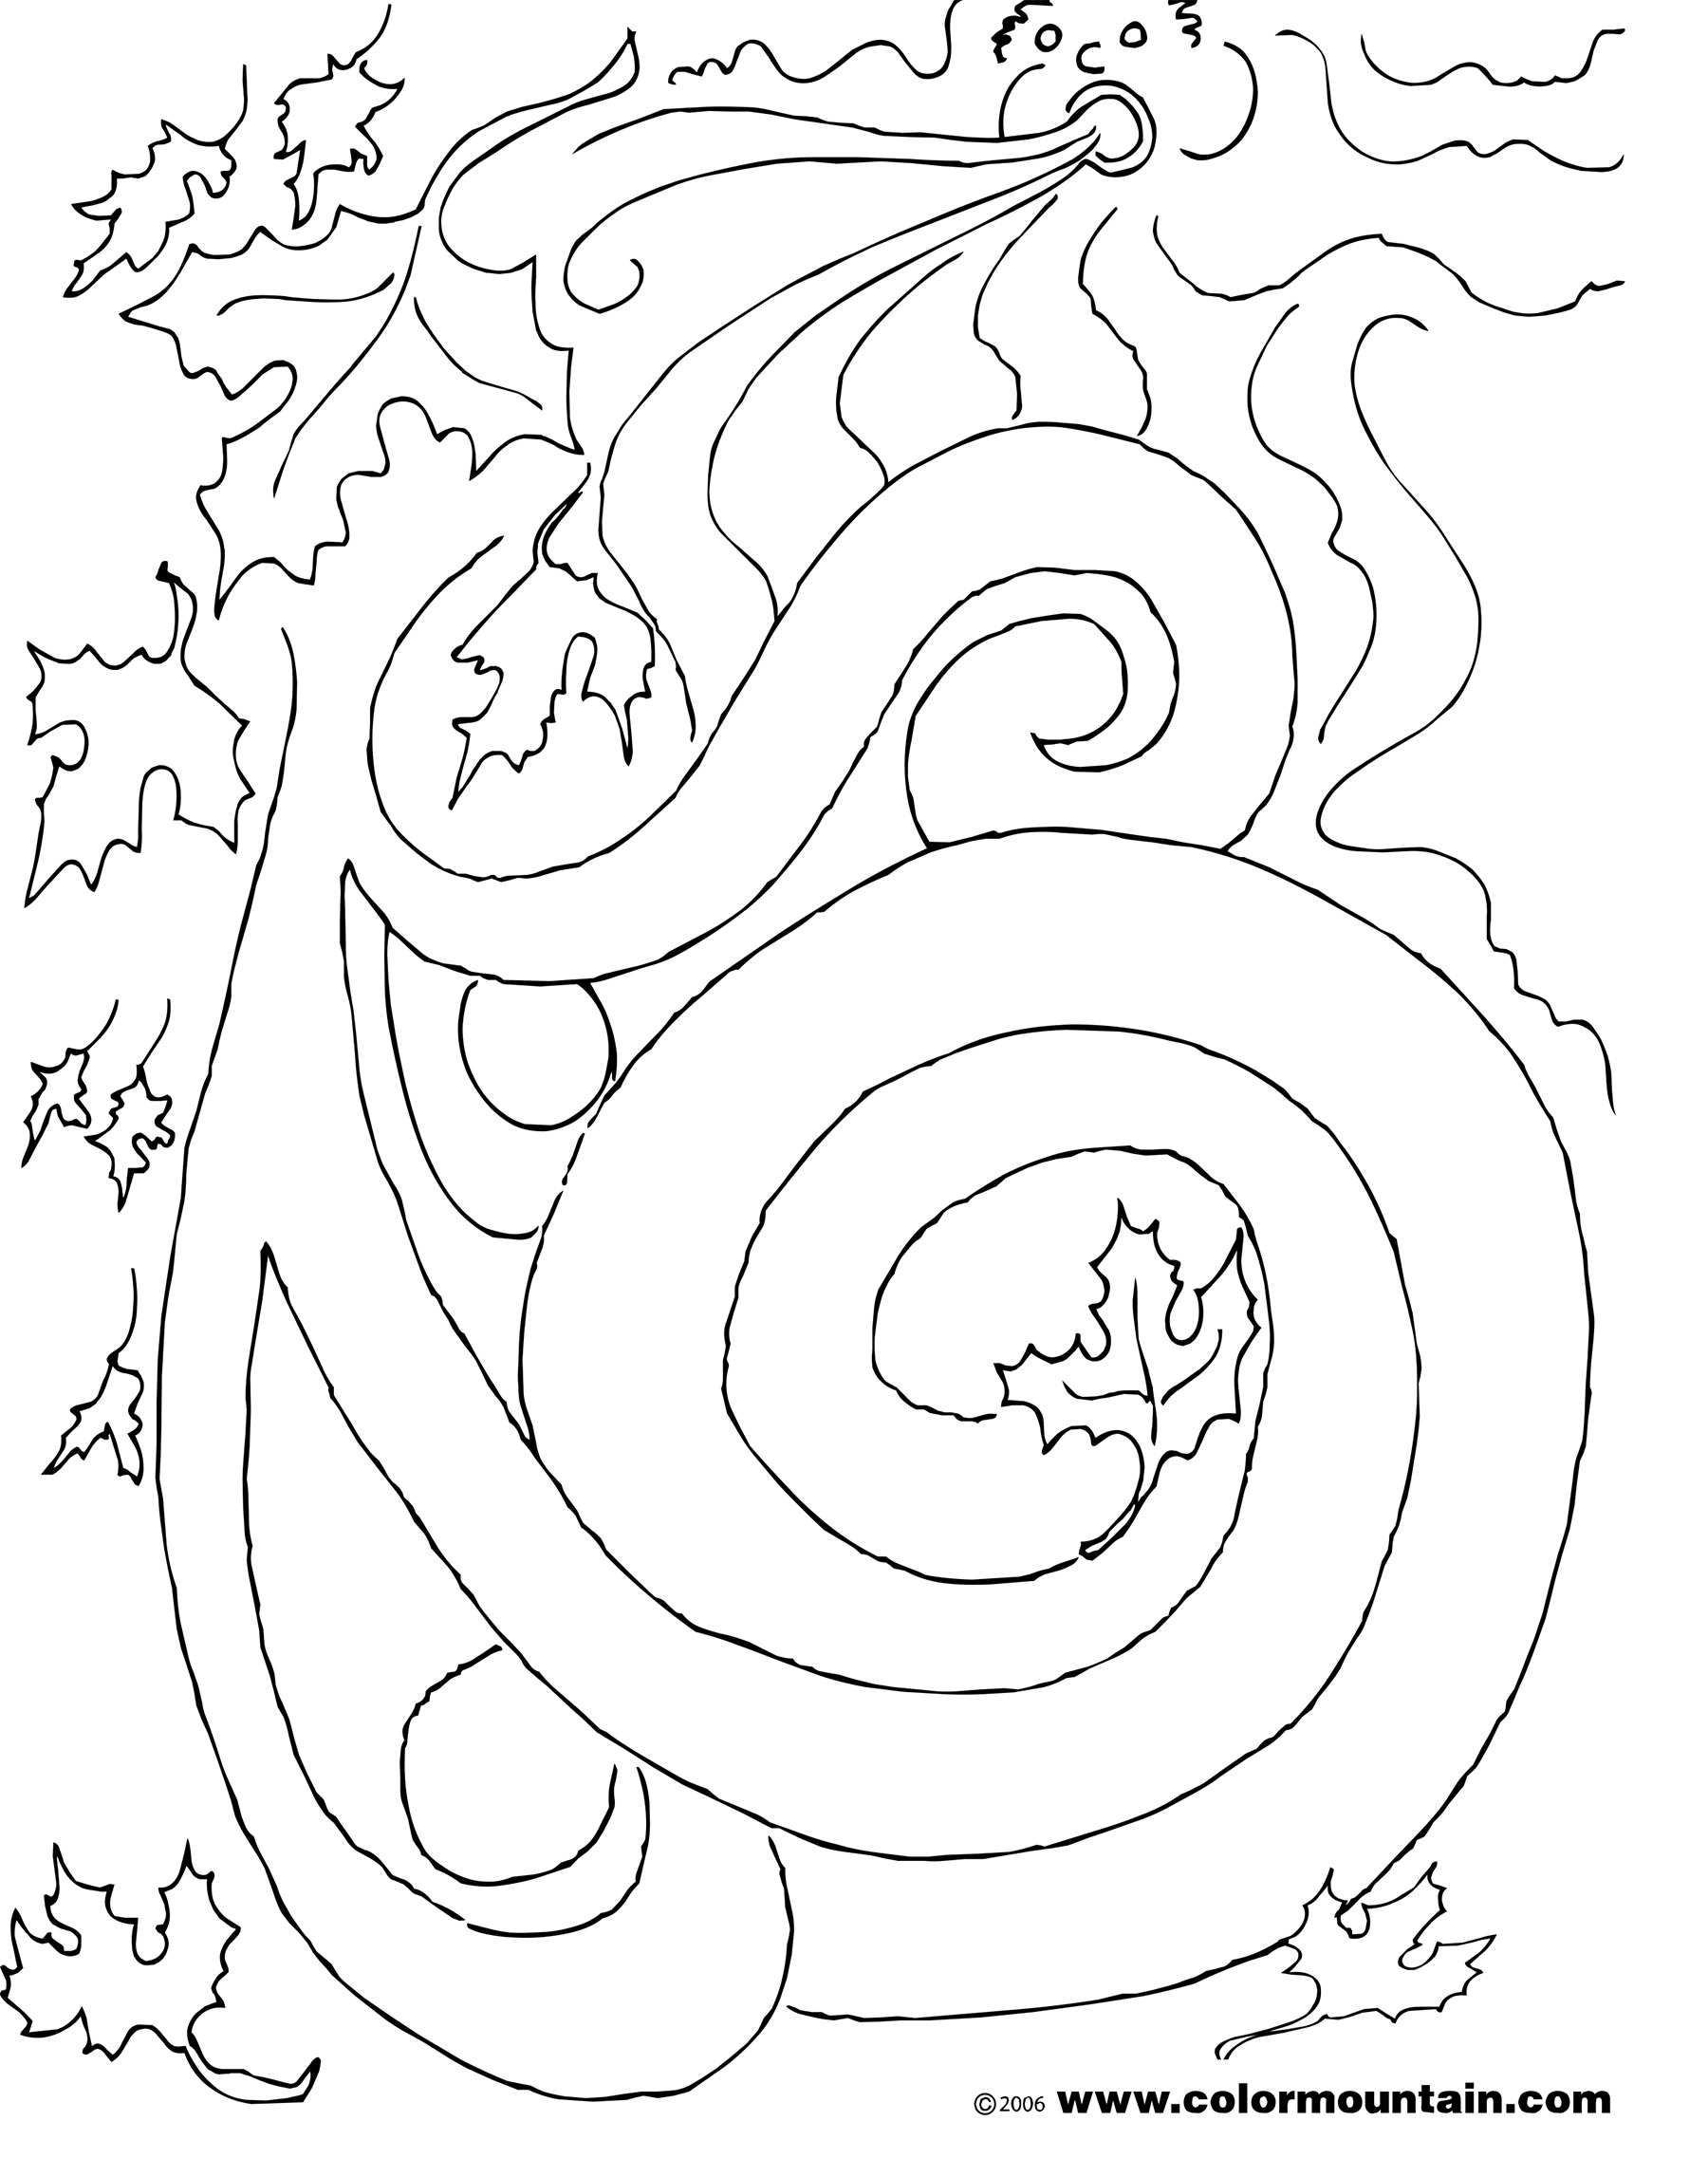 Wind Blowing Coloring Pages at GetColorings.com | Free printable